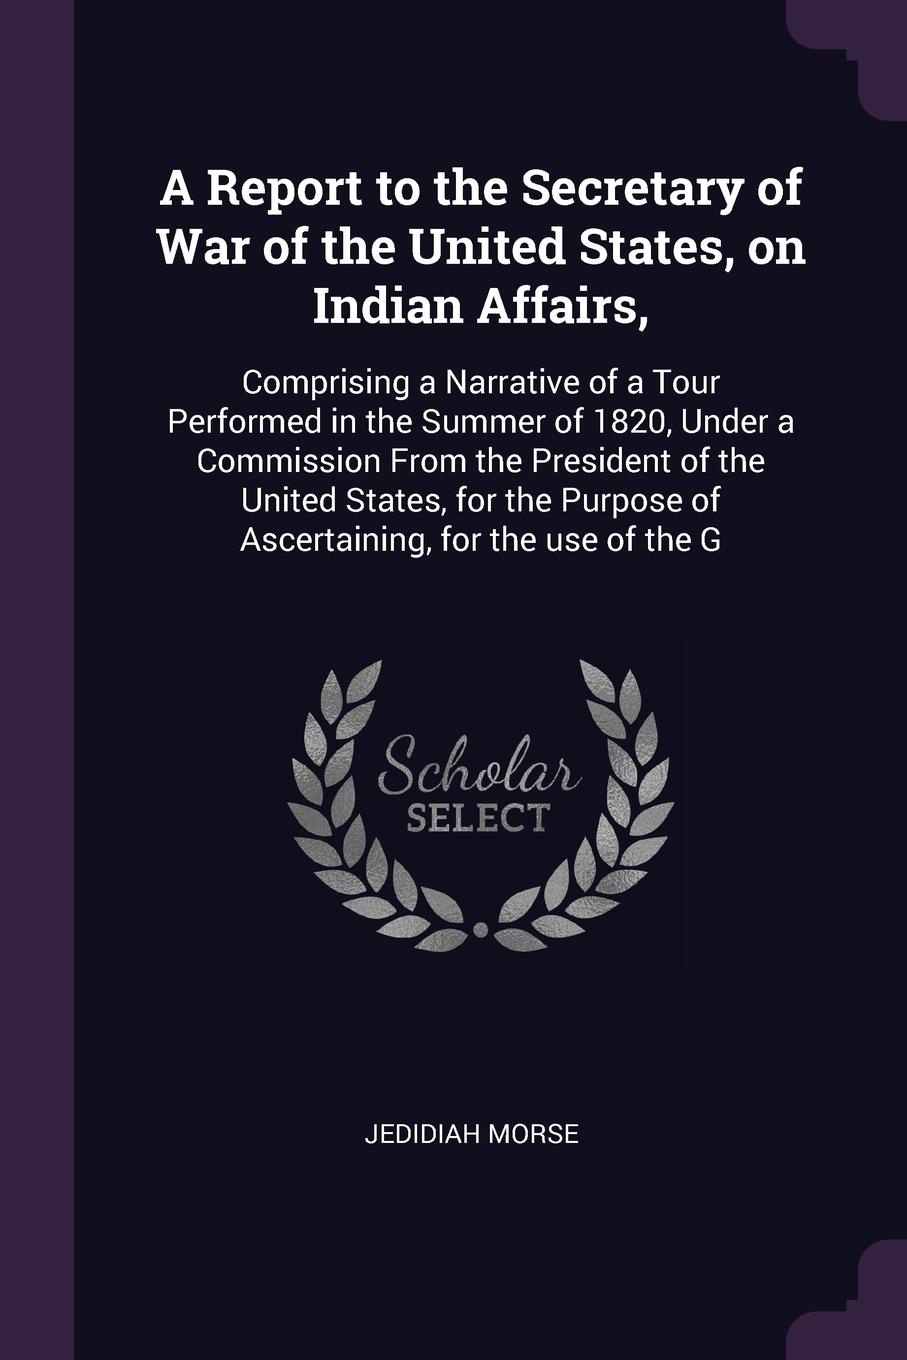 A Report to the Secretary of War of the United States, on Indian Affairs,. Comprising a Narrative of a Tour Performed in the Summer of 1820, Under a Commission From the President of the United States, for the Purpose of Ascertaining, for the use o...